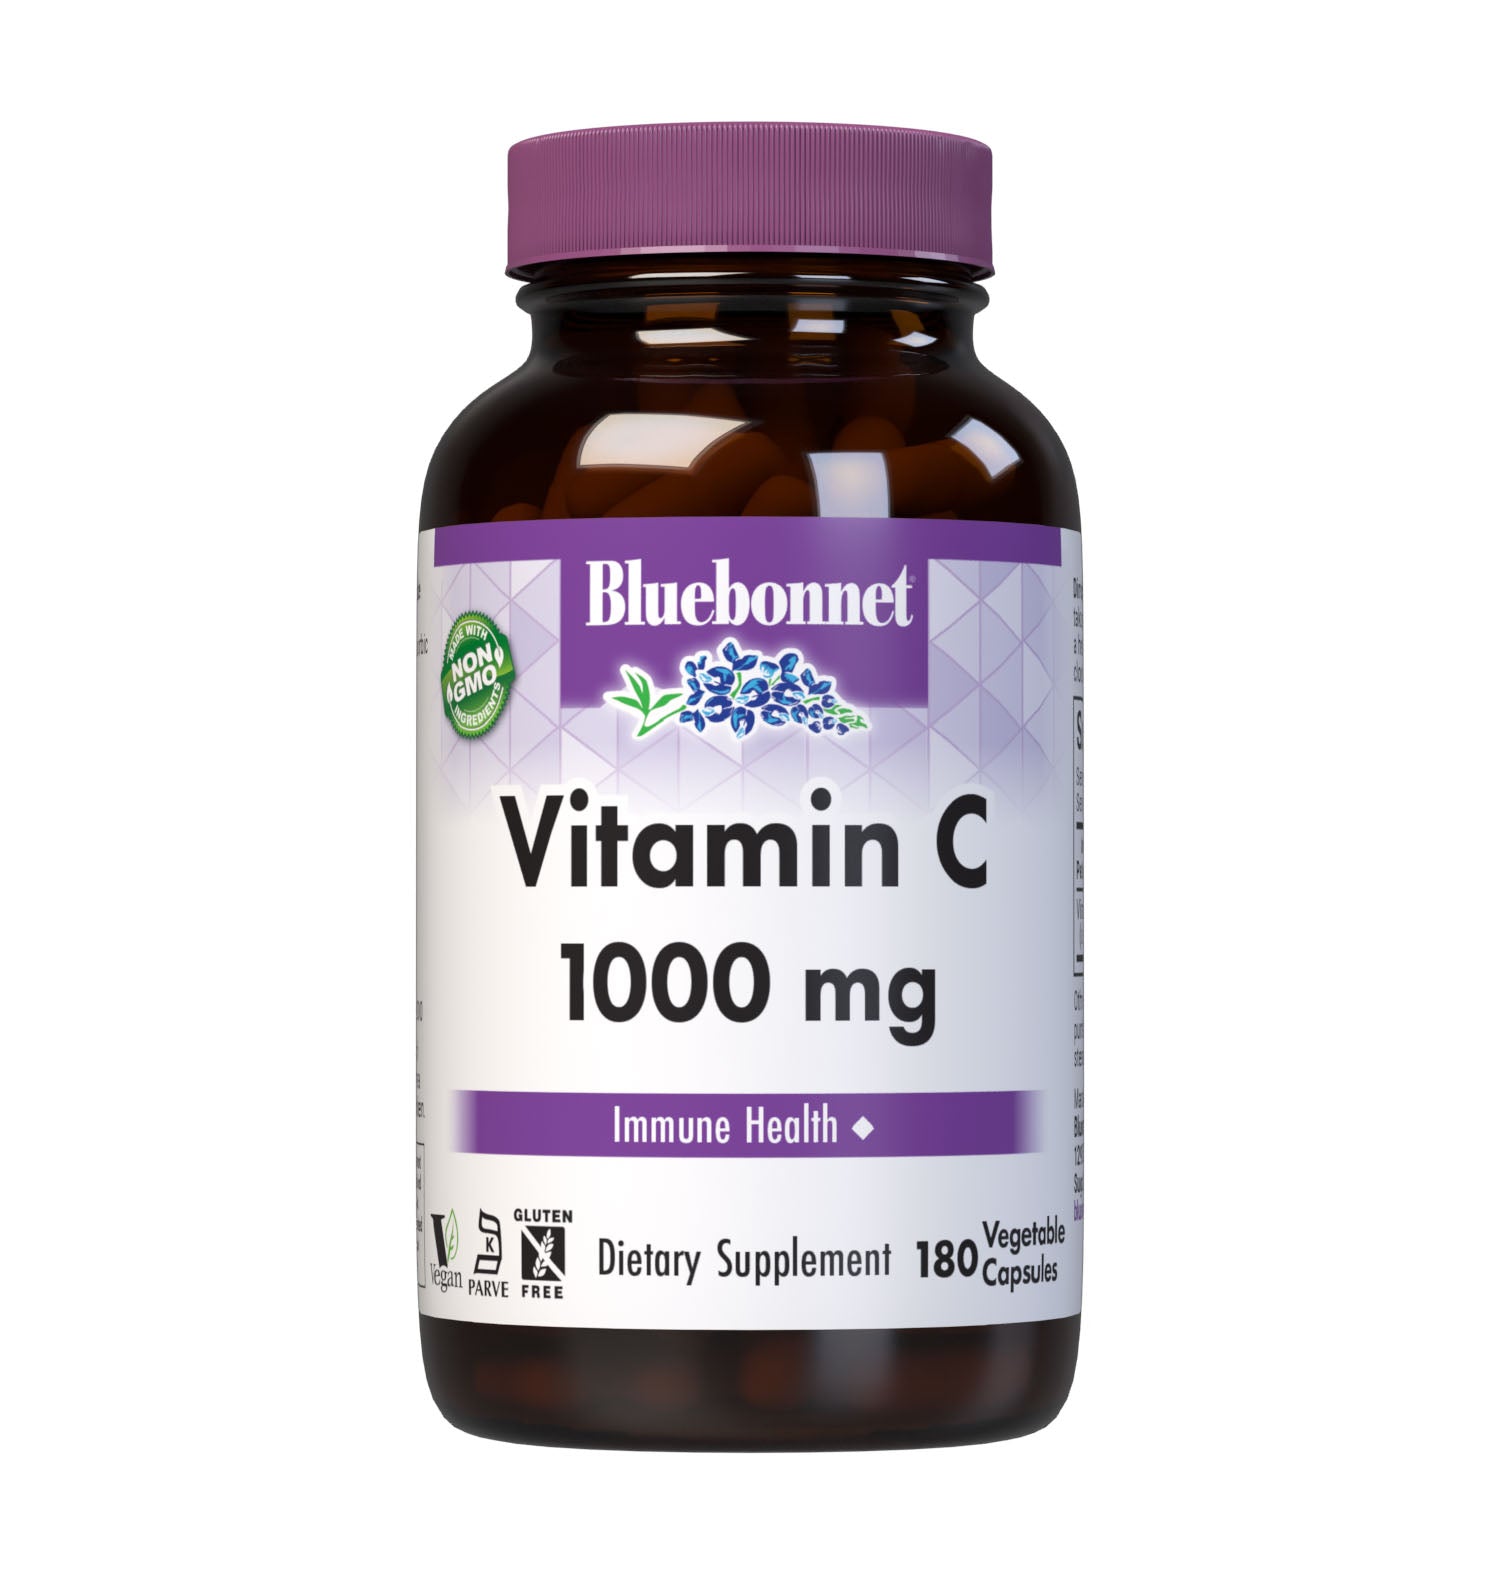 Bluebonnet Nutrition's Vitamin C-1000 mg 180 Vegetable Capsules are formulated with non-GMO, identity-preserved (IP) vitamin C from L-ascorbic acid to help support immune function. #size_180 count